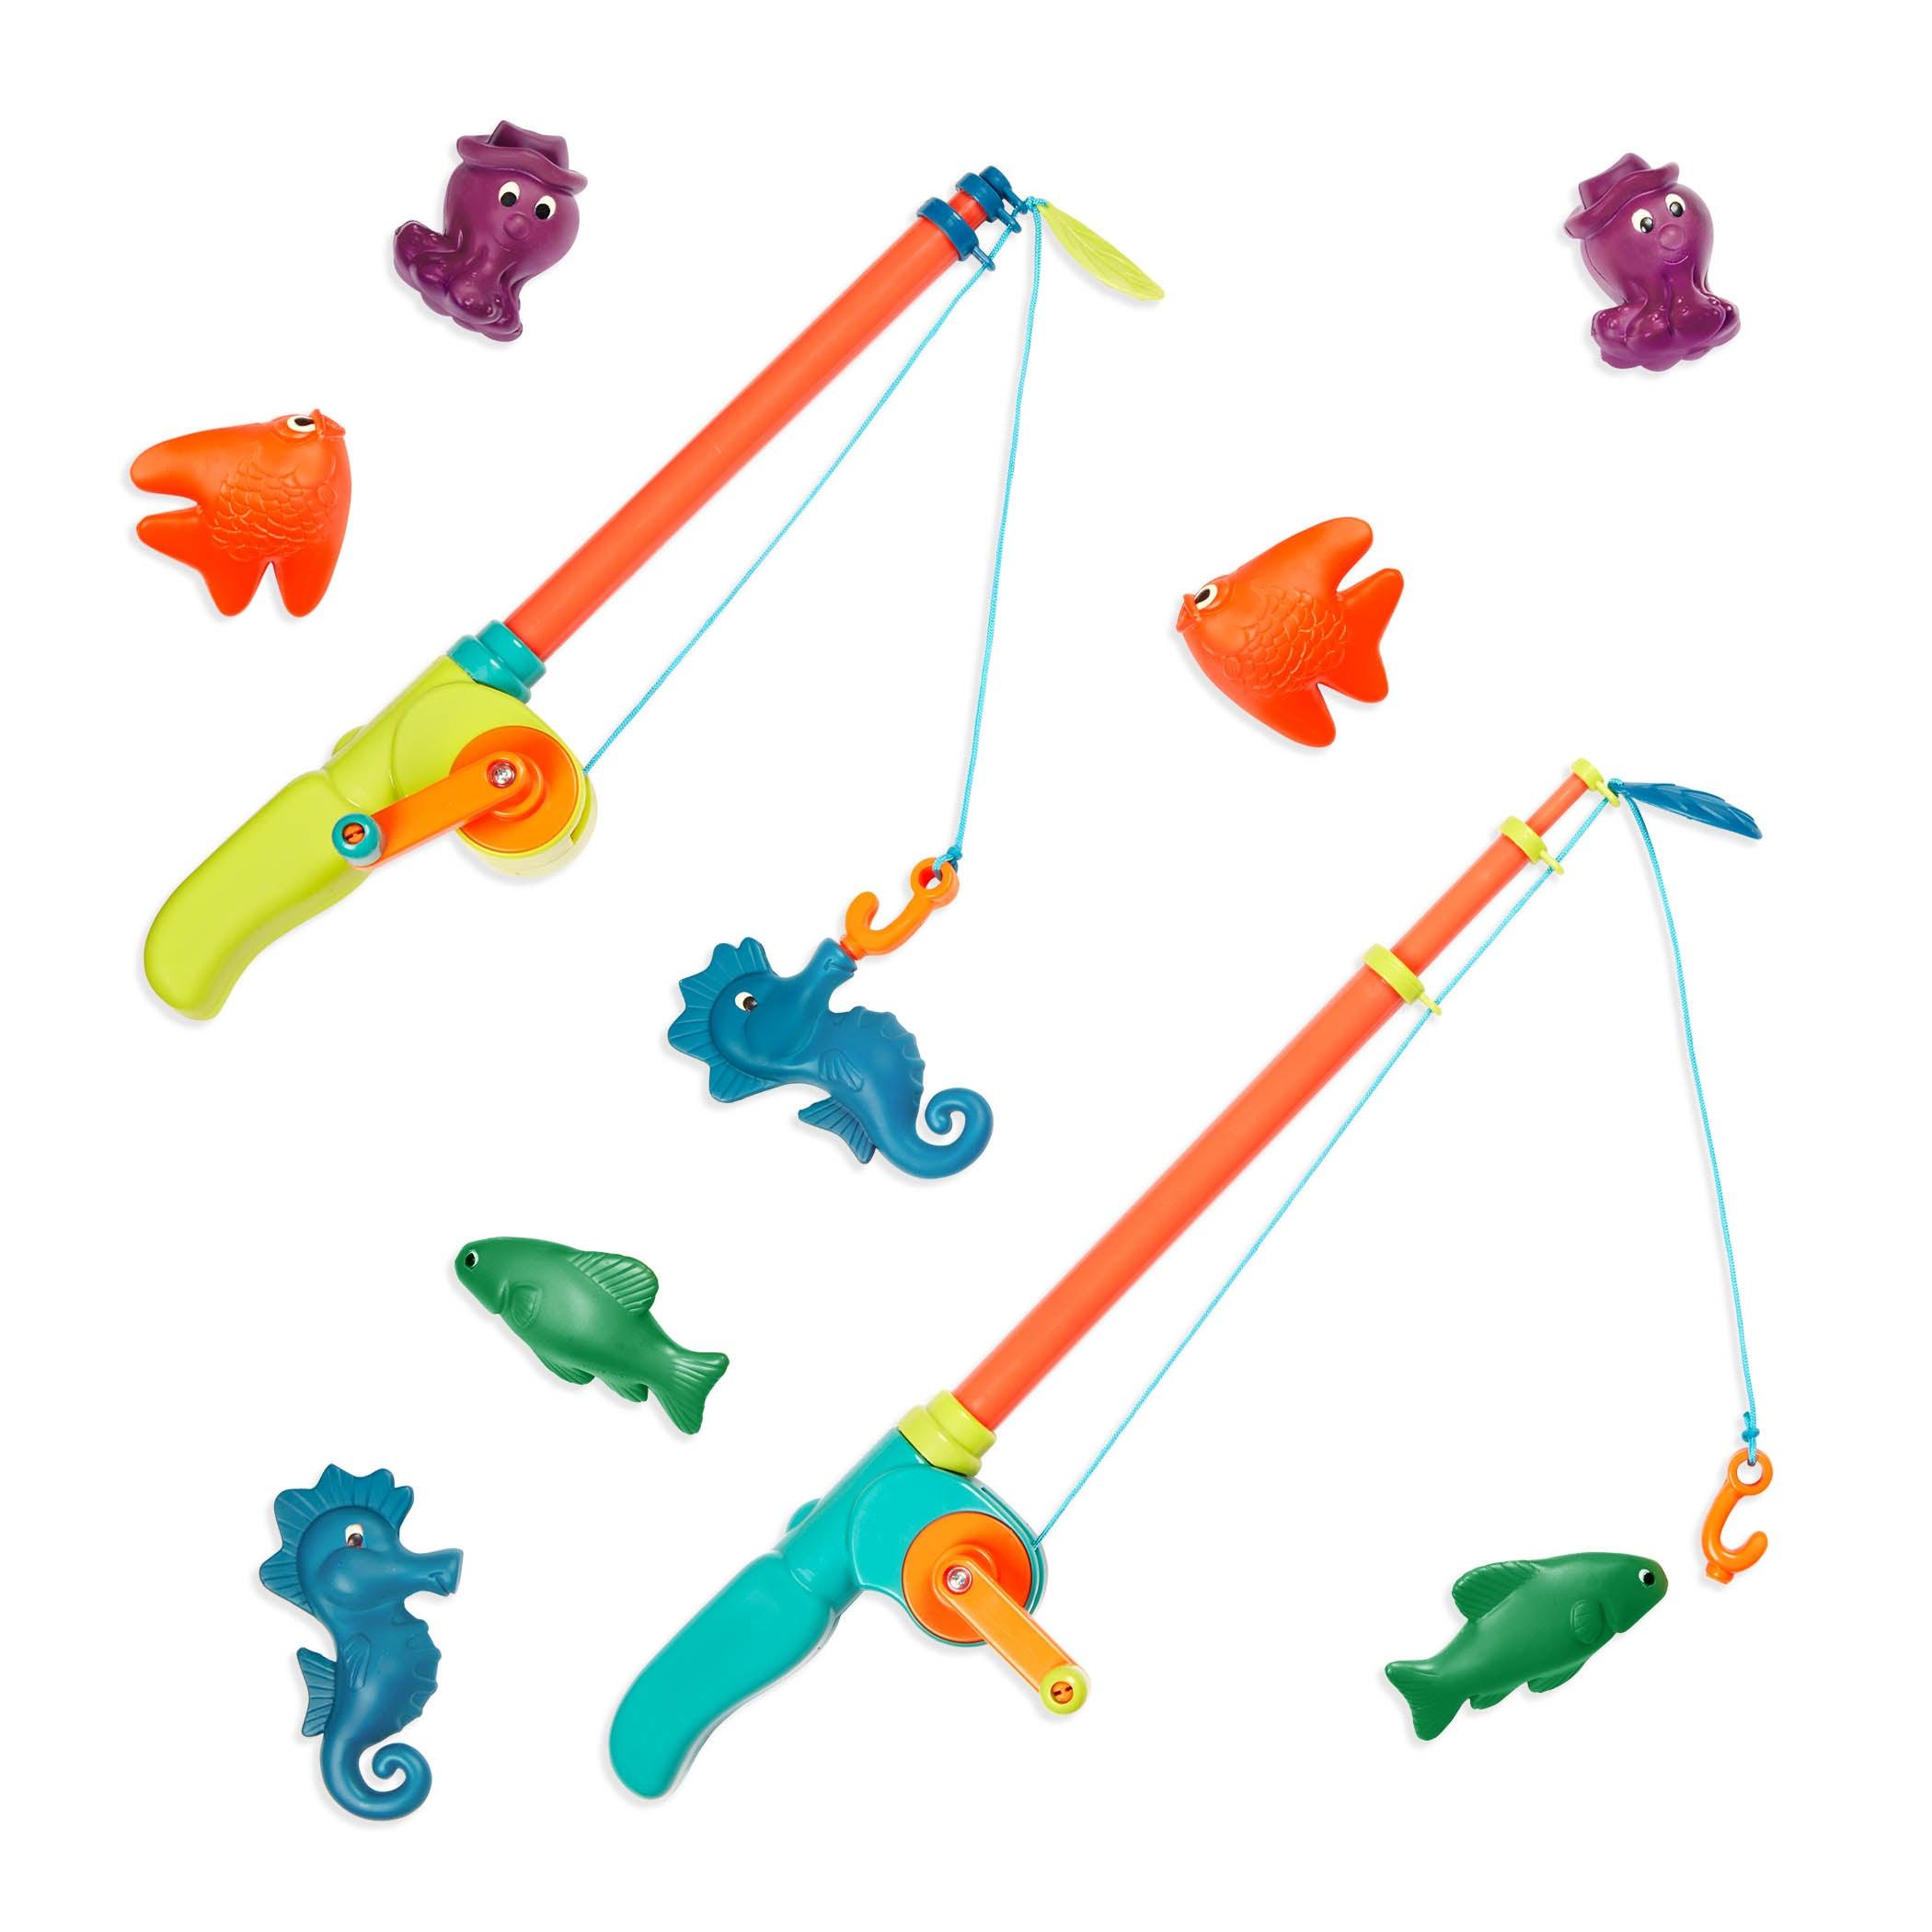 B.Toys: Little Fisher's color-changing fishing kit